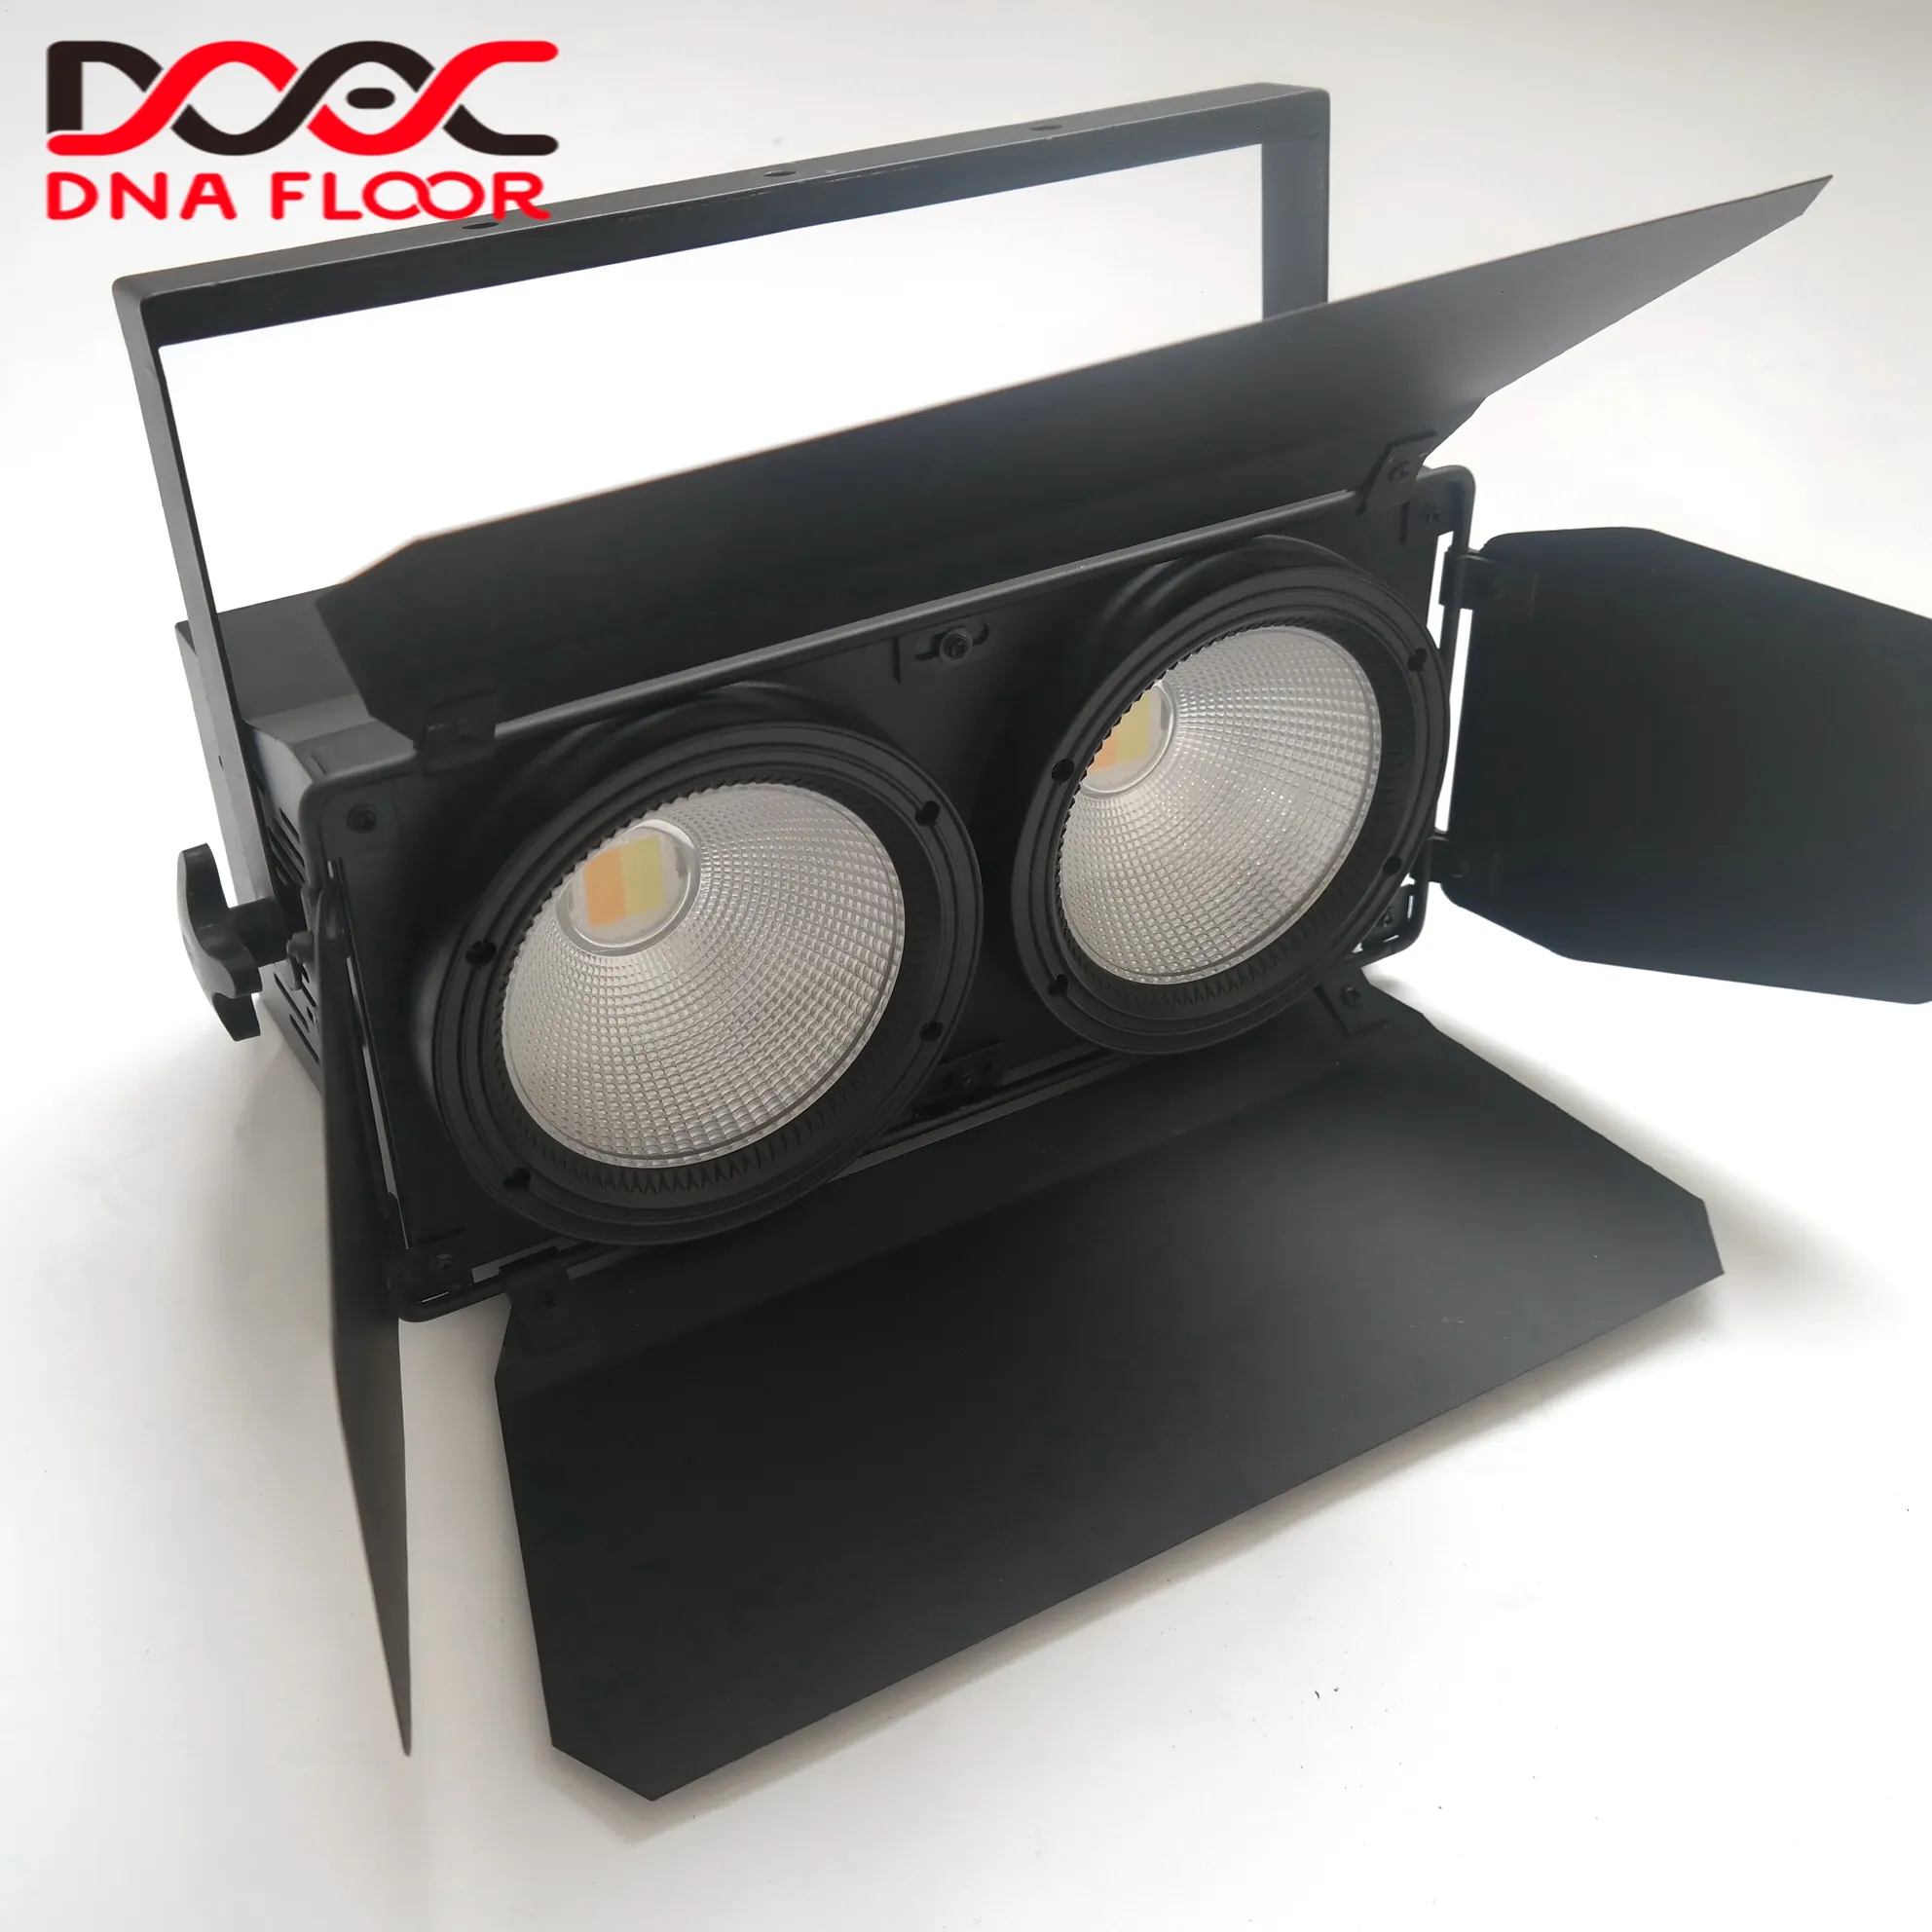 2x100w Two Eyes LED COB blinder light stage lighting effect cold warm white light DJ disco party equipment